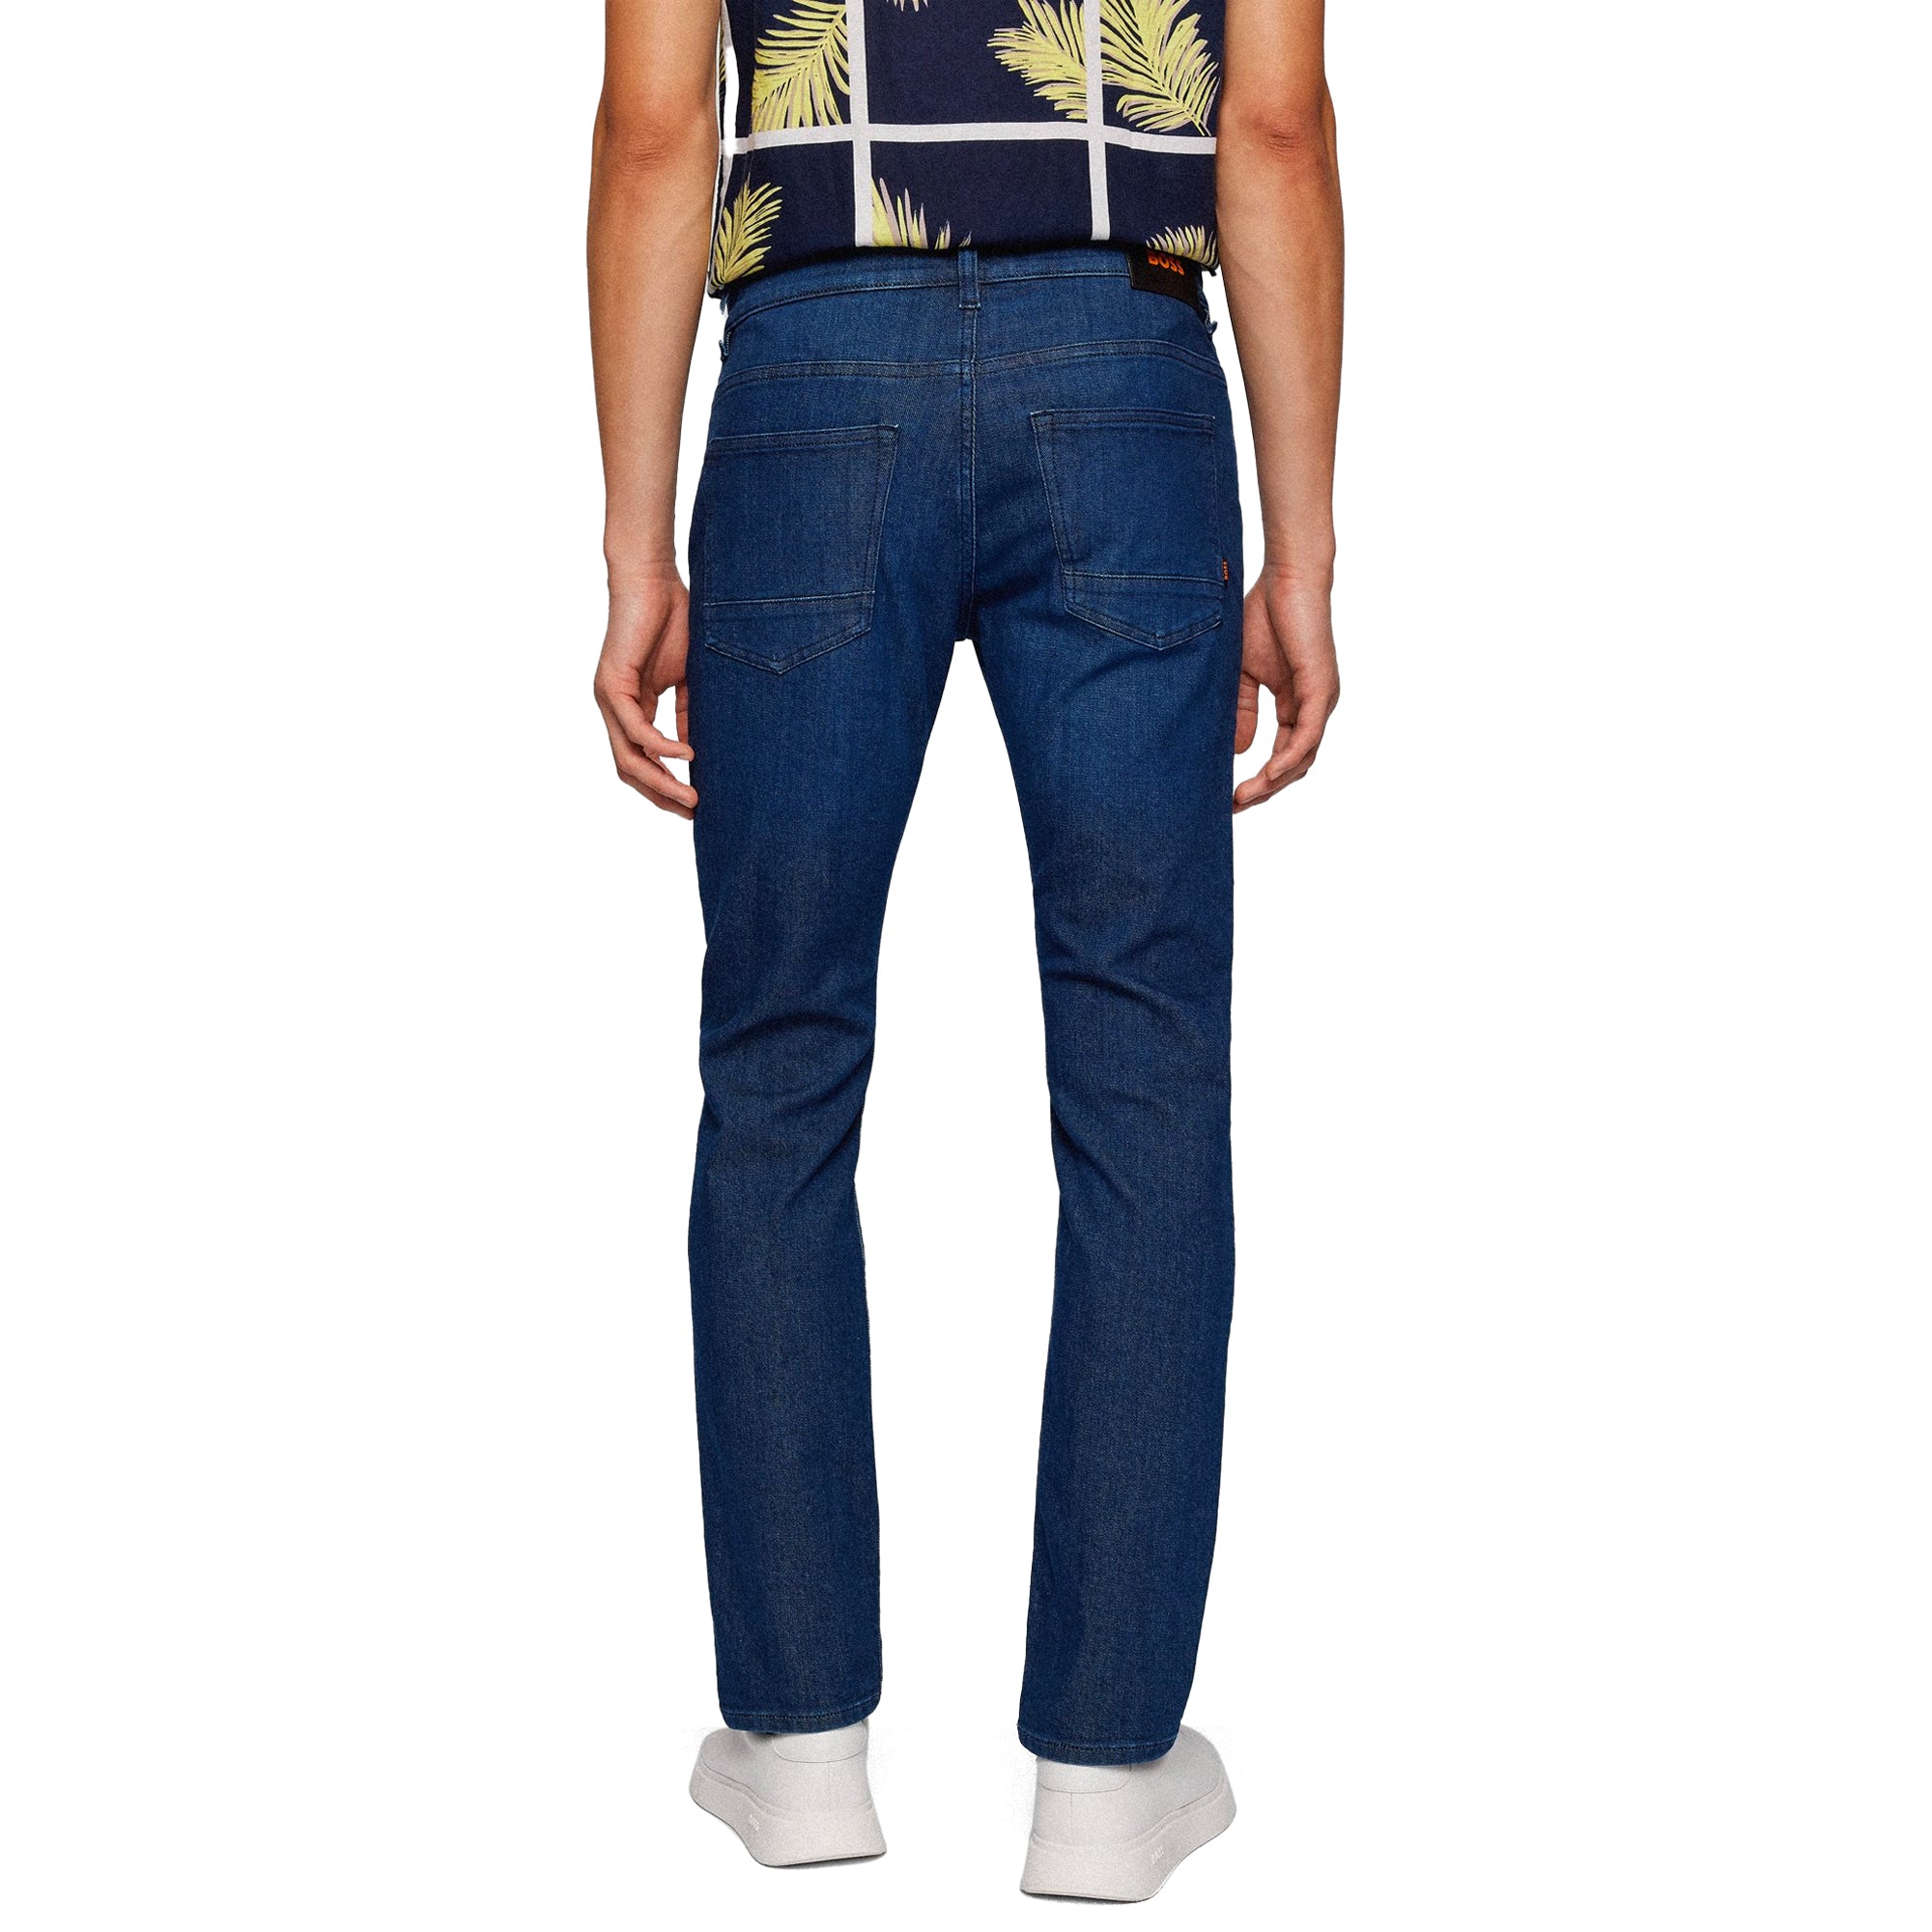 Boss Delaware Slim Fit Jeans - End on End Stretch